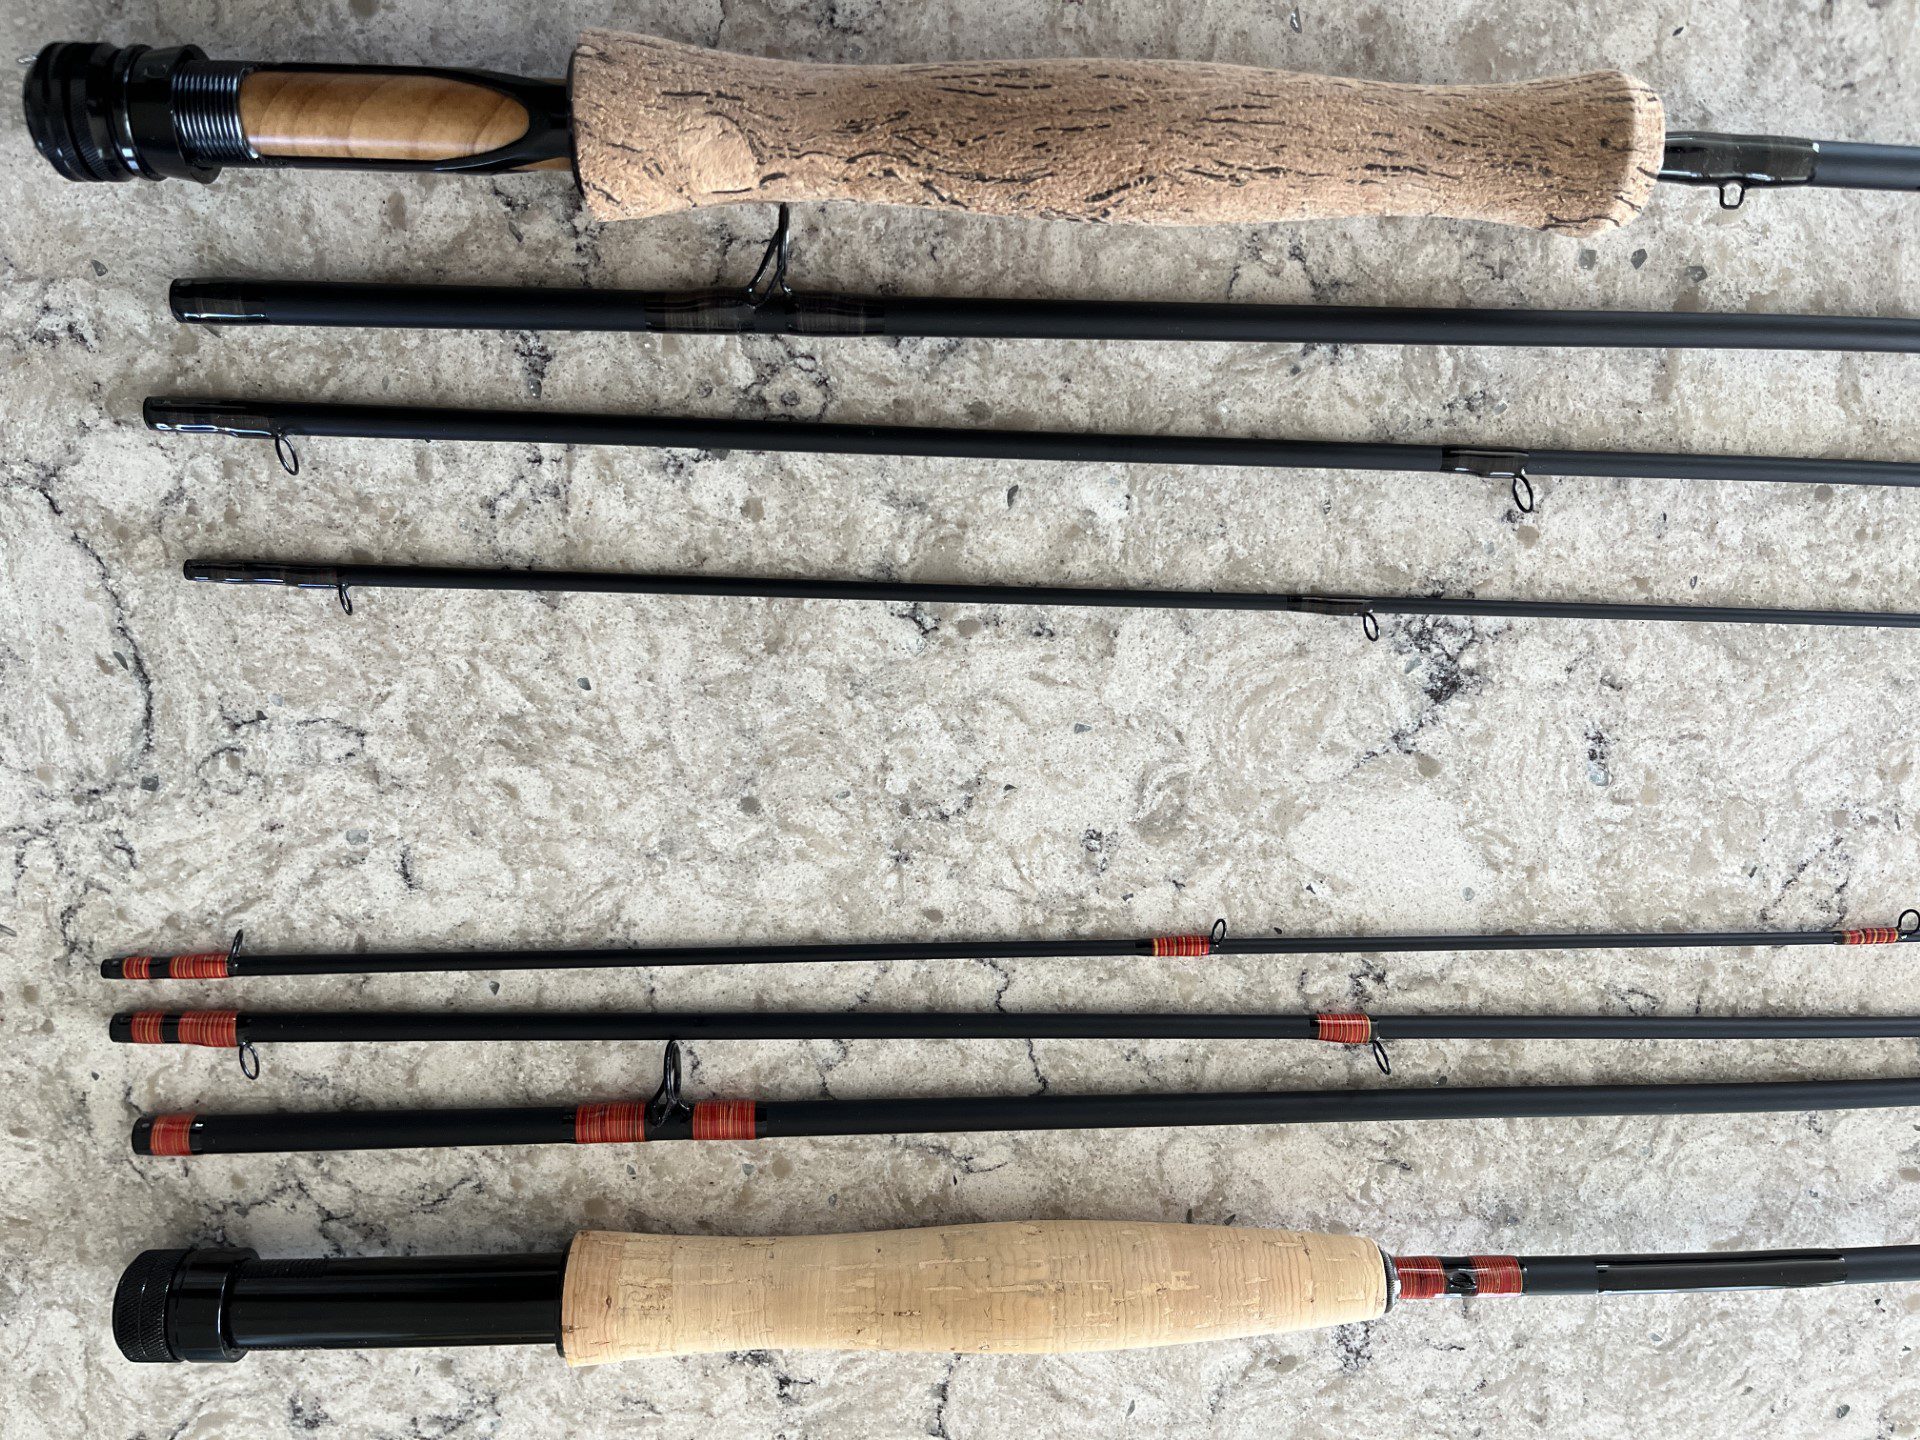 Neon yellow and copper  Custom rods, Custom fishing rods, Fly rods